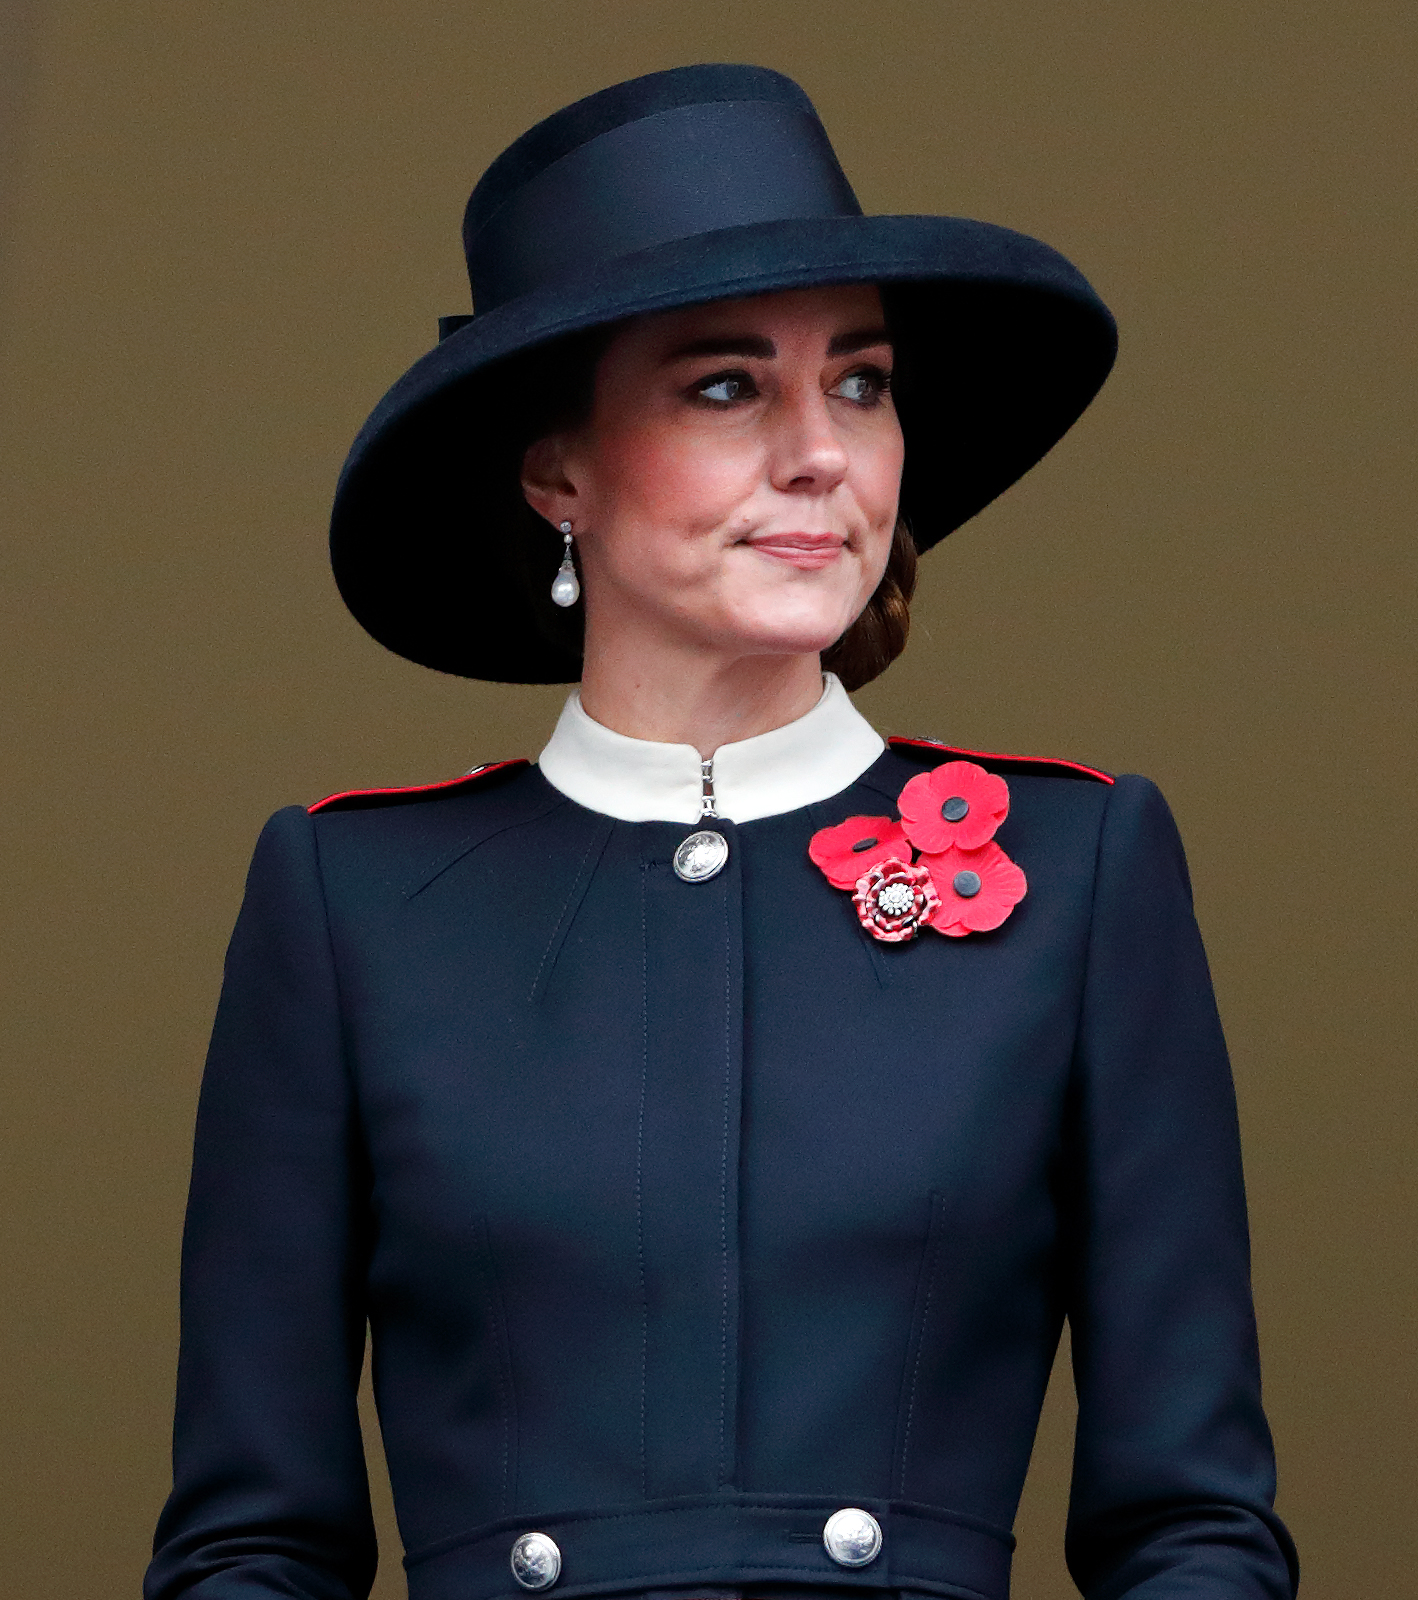 Catherine, Duchess of Cambridge at the annual Remembrance Sunday service on November 14, 2021, in London, England | Source: Getty Images